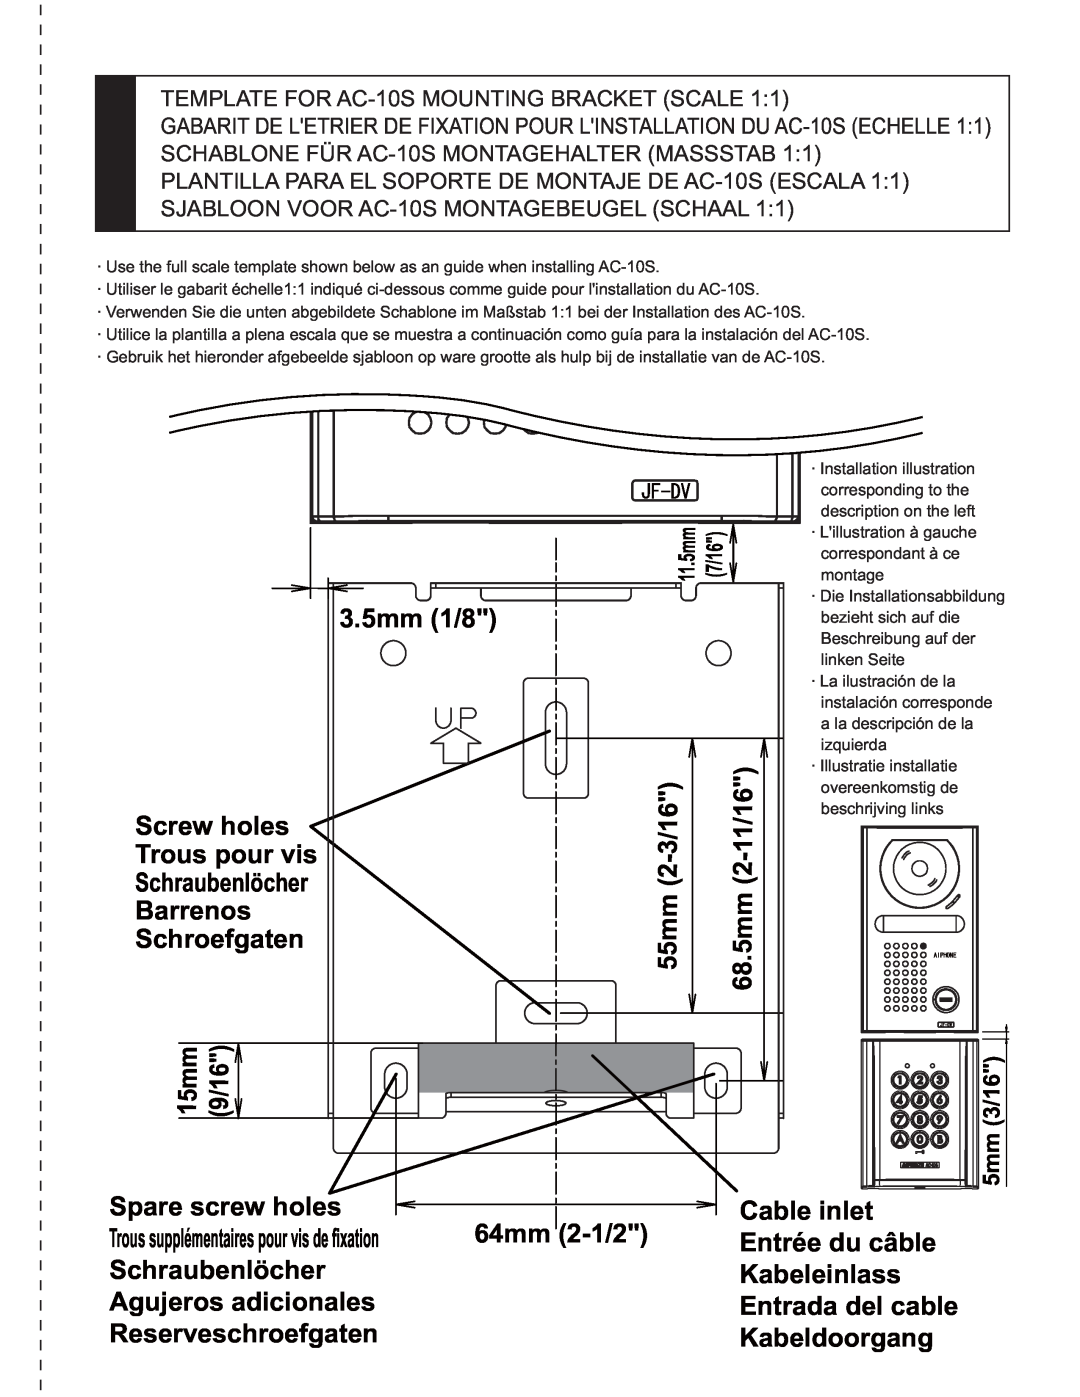 Aiphone AC-10S operation manual 3.5mm 1/8 